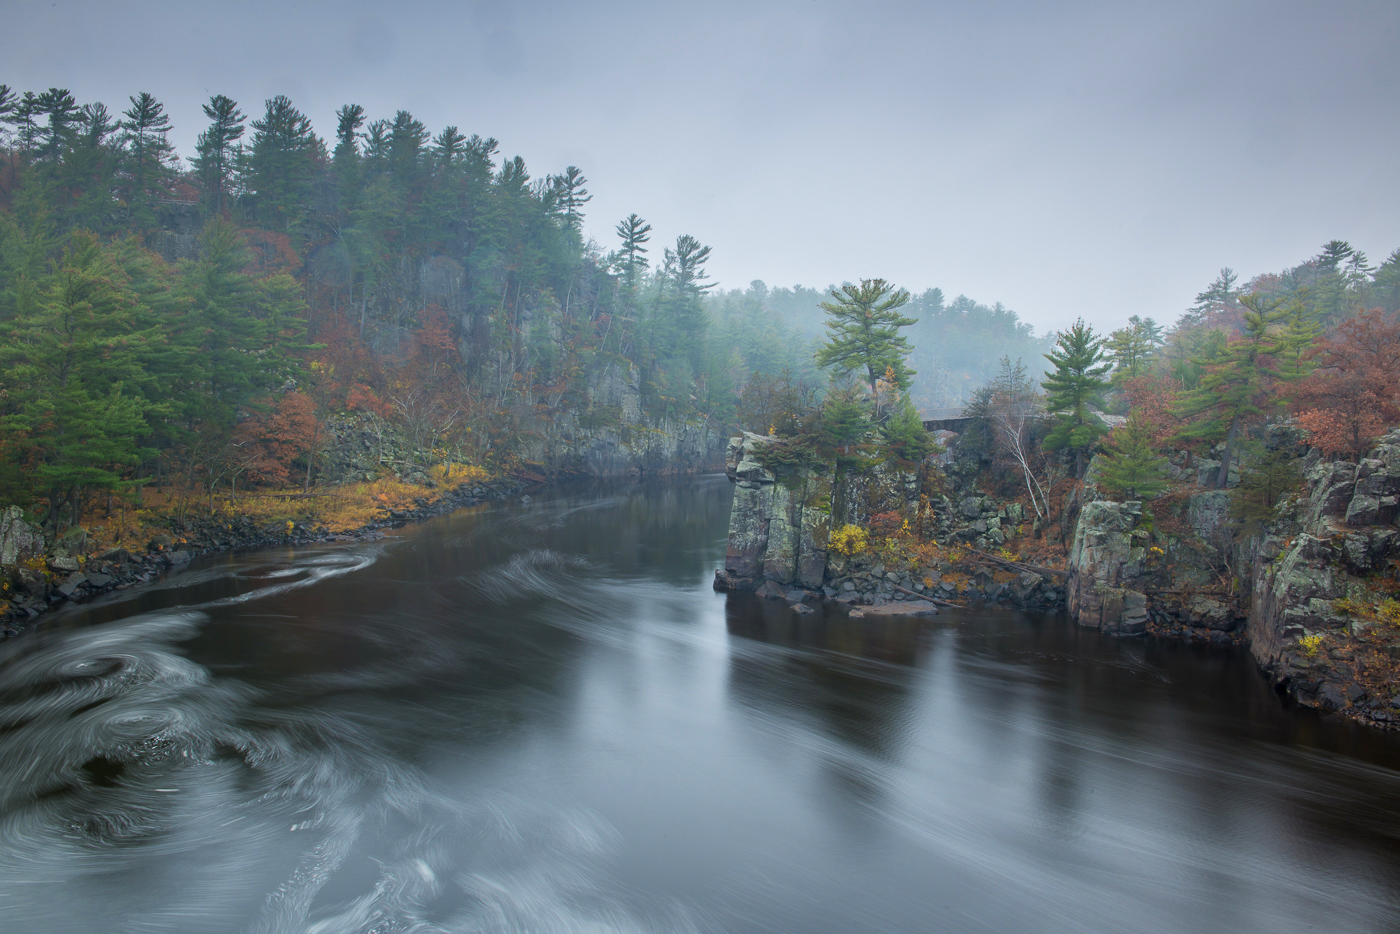 Fog along the Dalles of the St. Croix National Scenic River, Minesota/Wisconsin